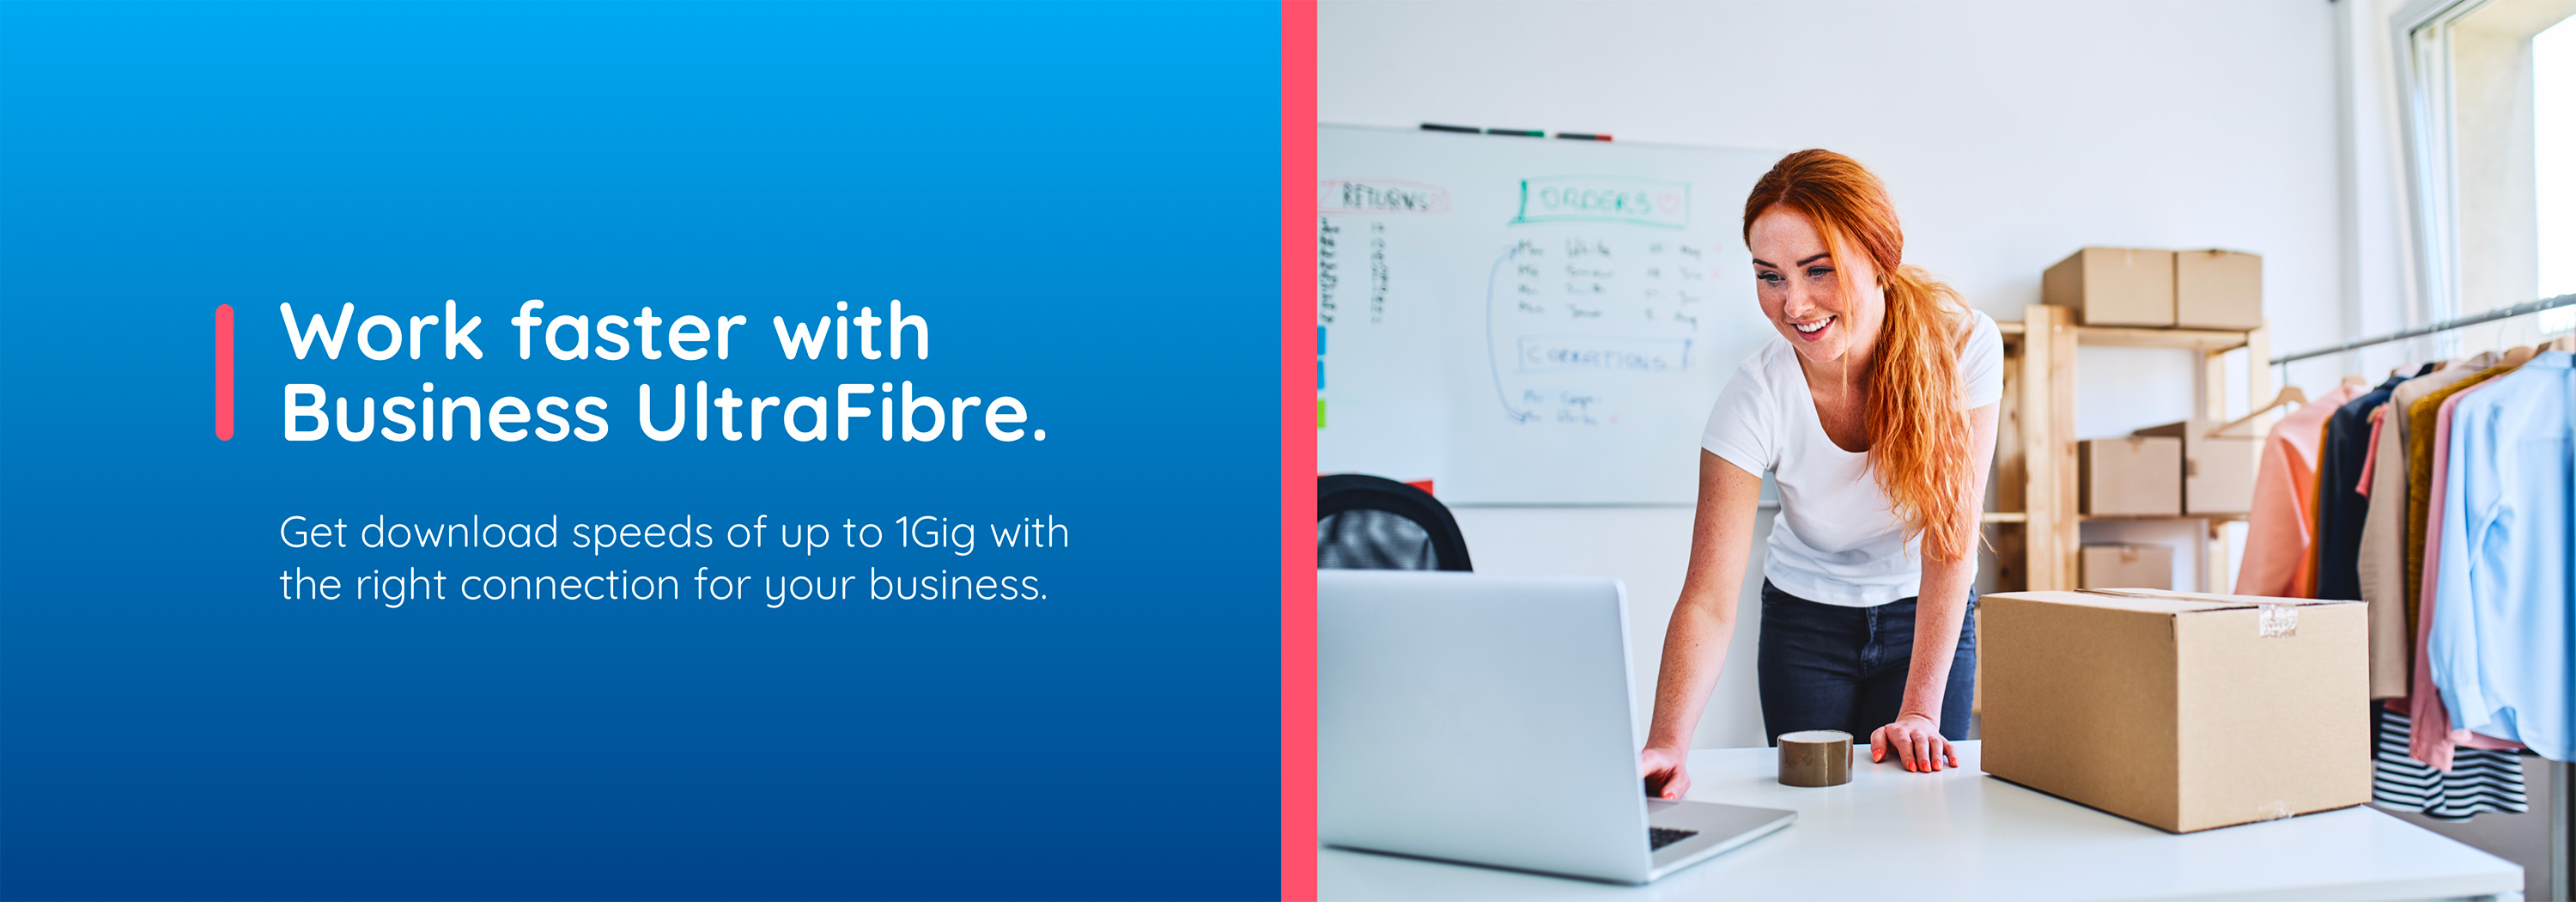 Work faster with  Business UltraFibre. Get download speeds of up to 1Gig with the right connection for your business.